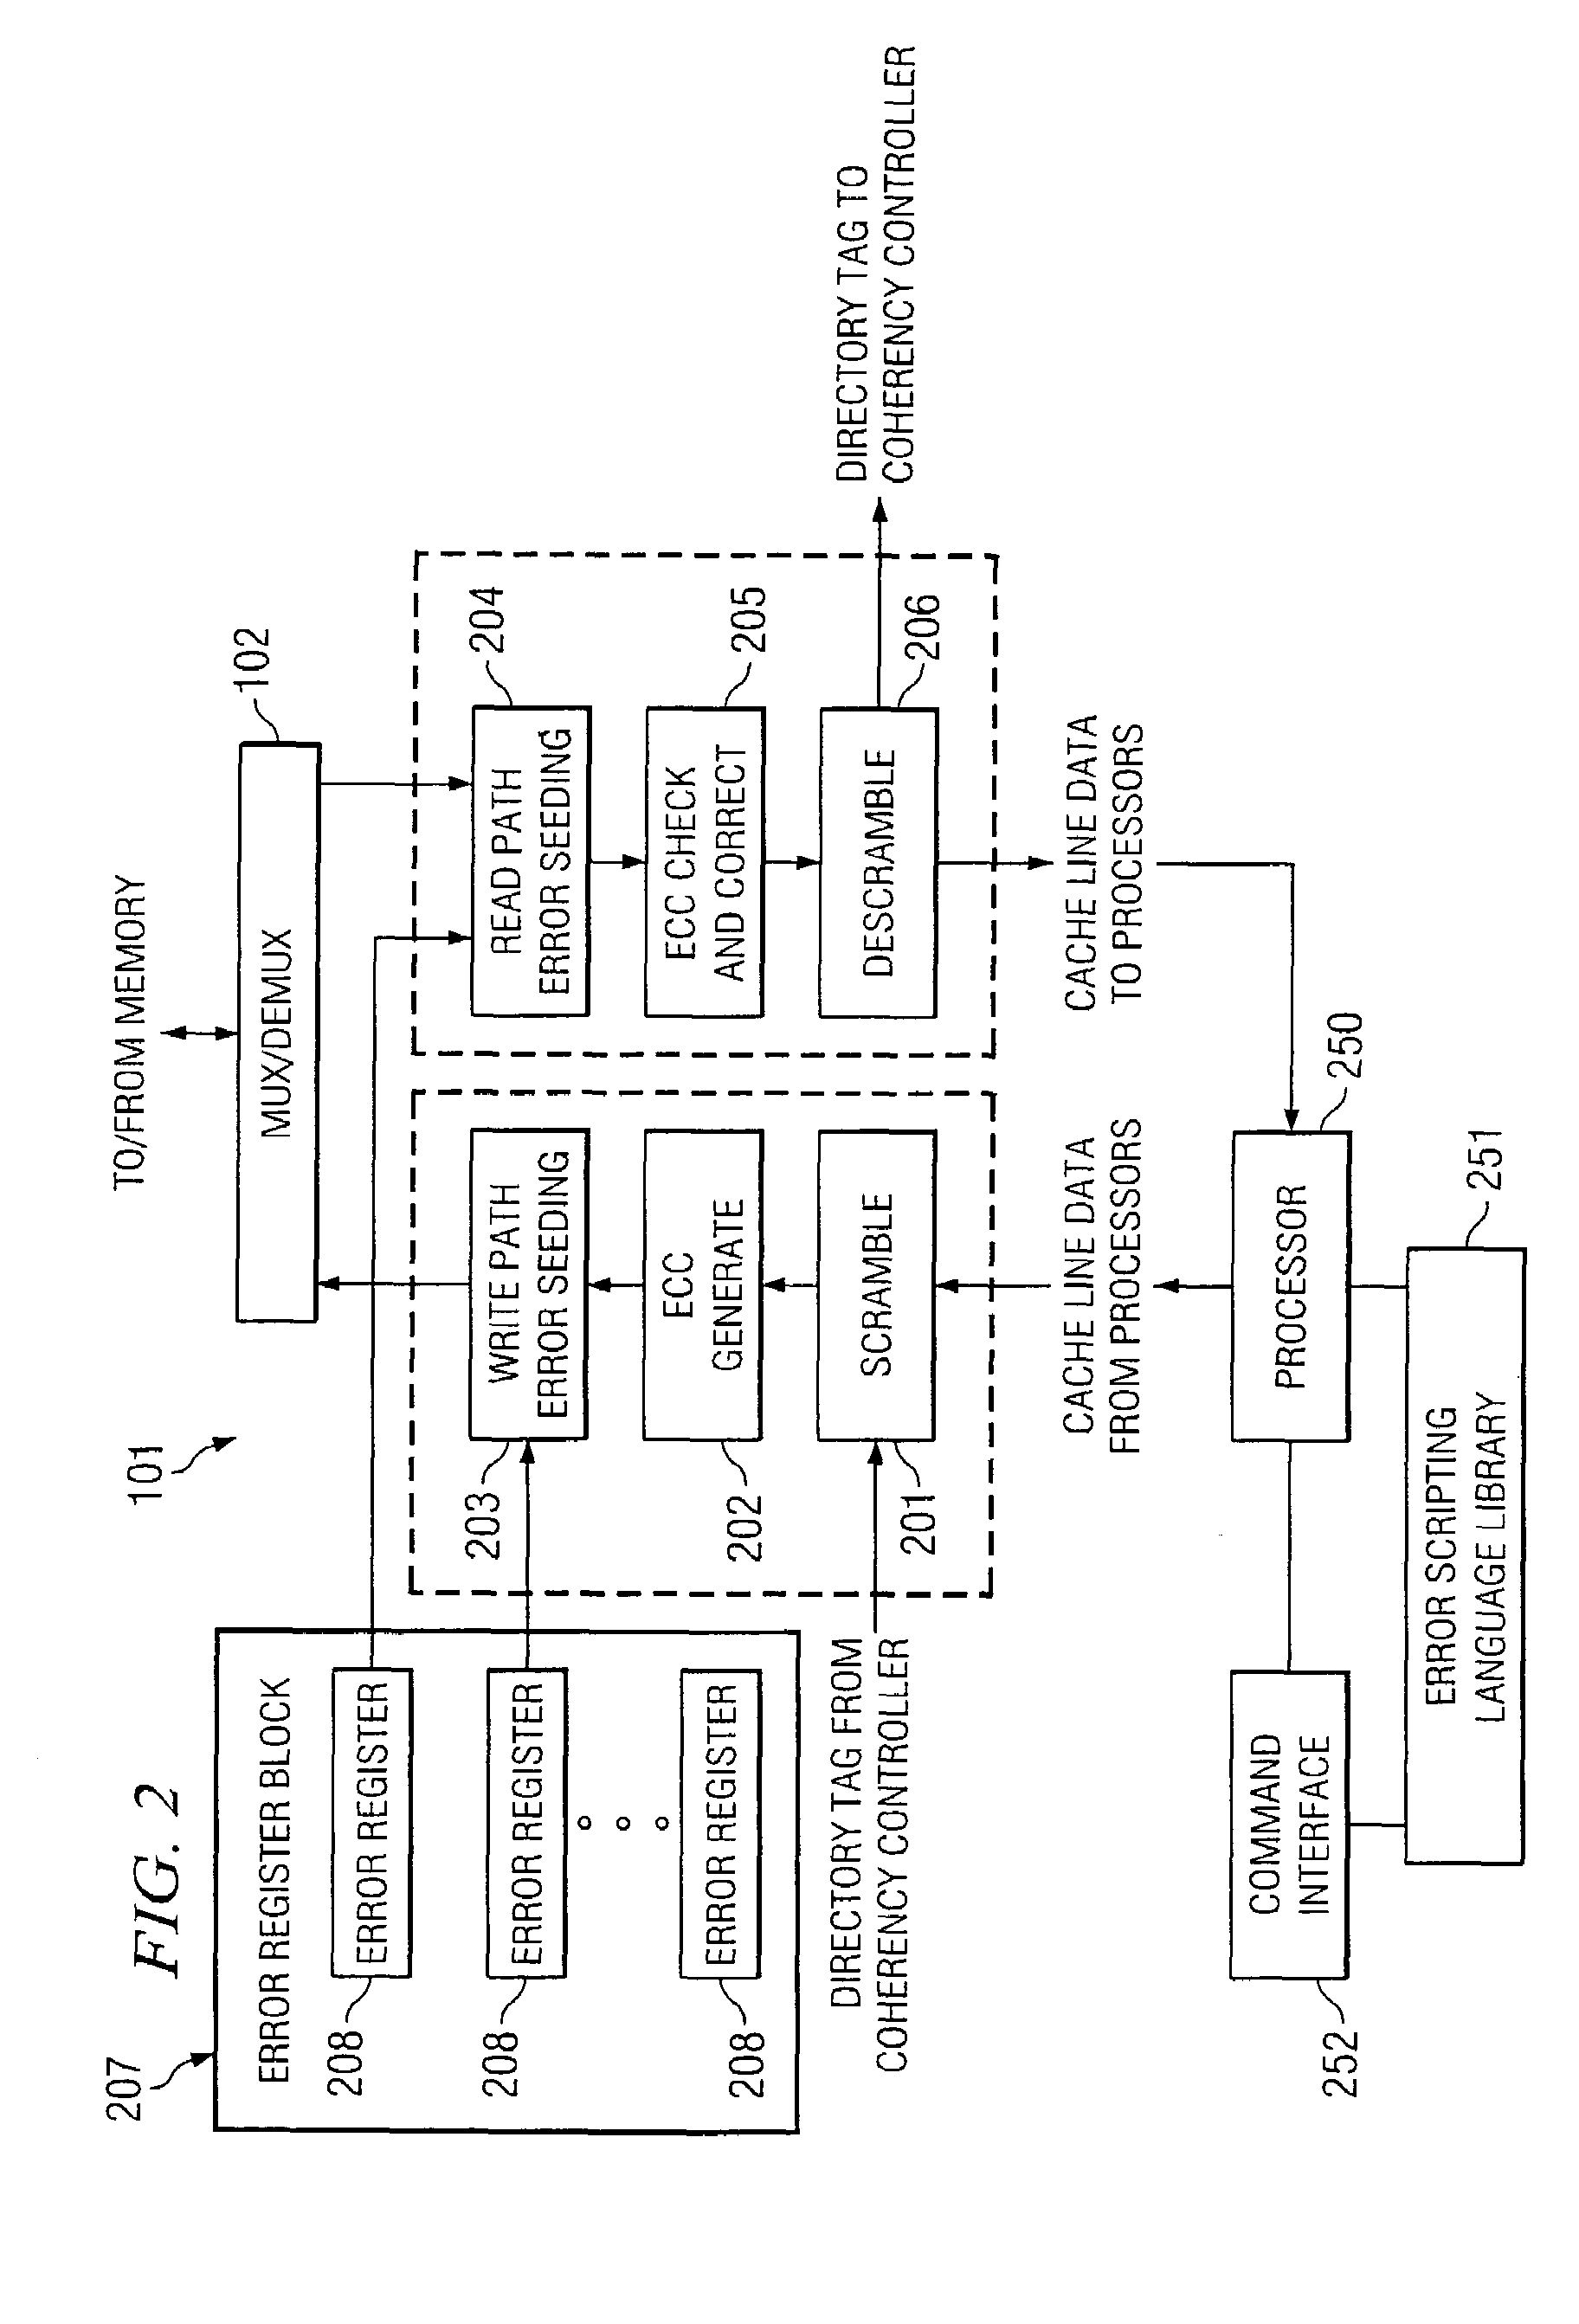 Systems and methods for scripting data errors to facilitate verification of error detection or correction code functionality